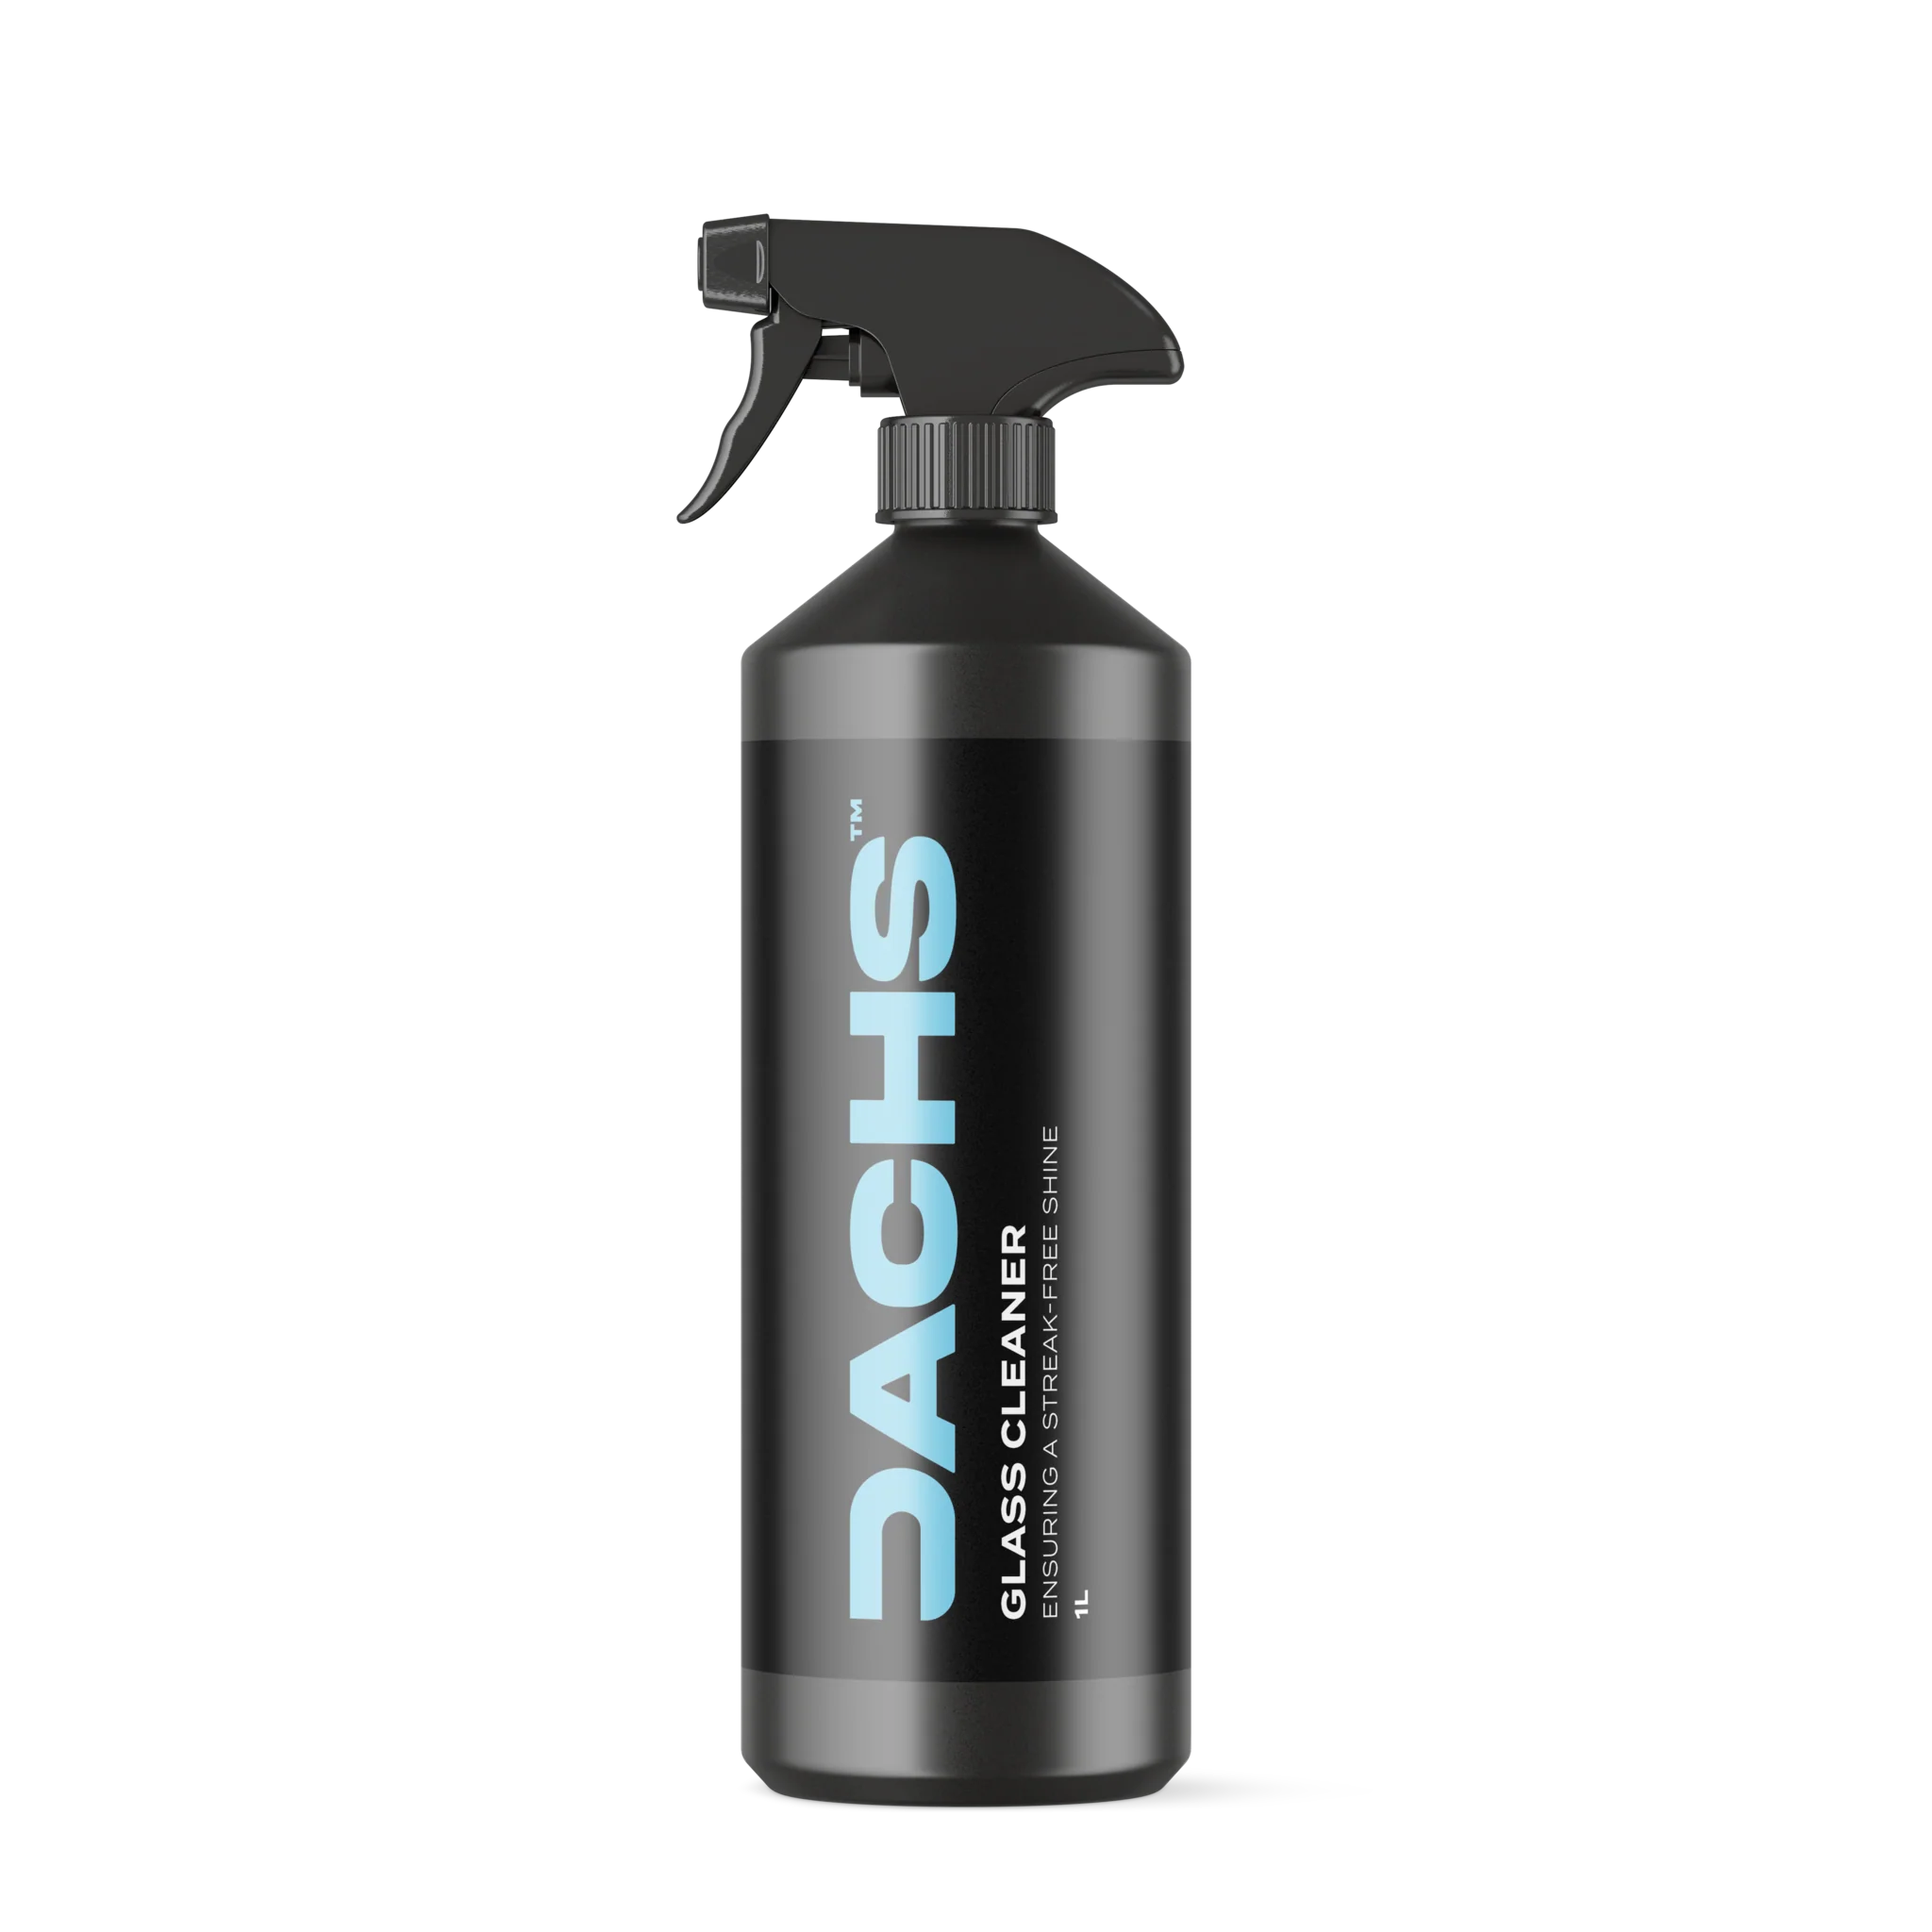 Dachs Glass Cleaner